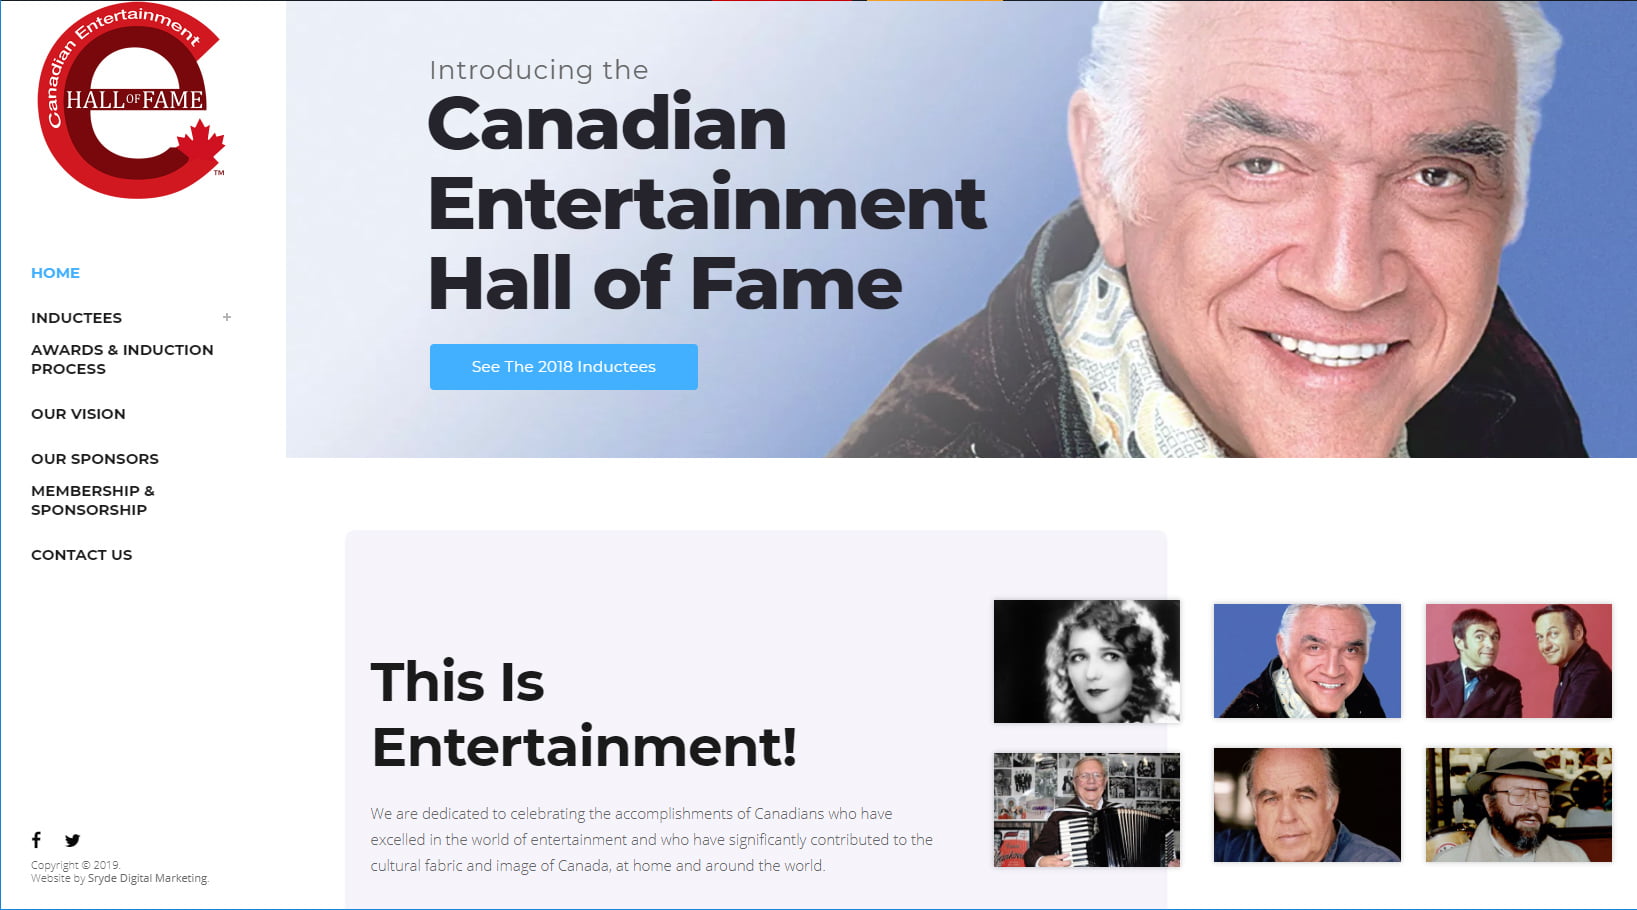 Canadian Entertainment Hall of Fame